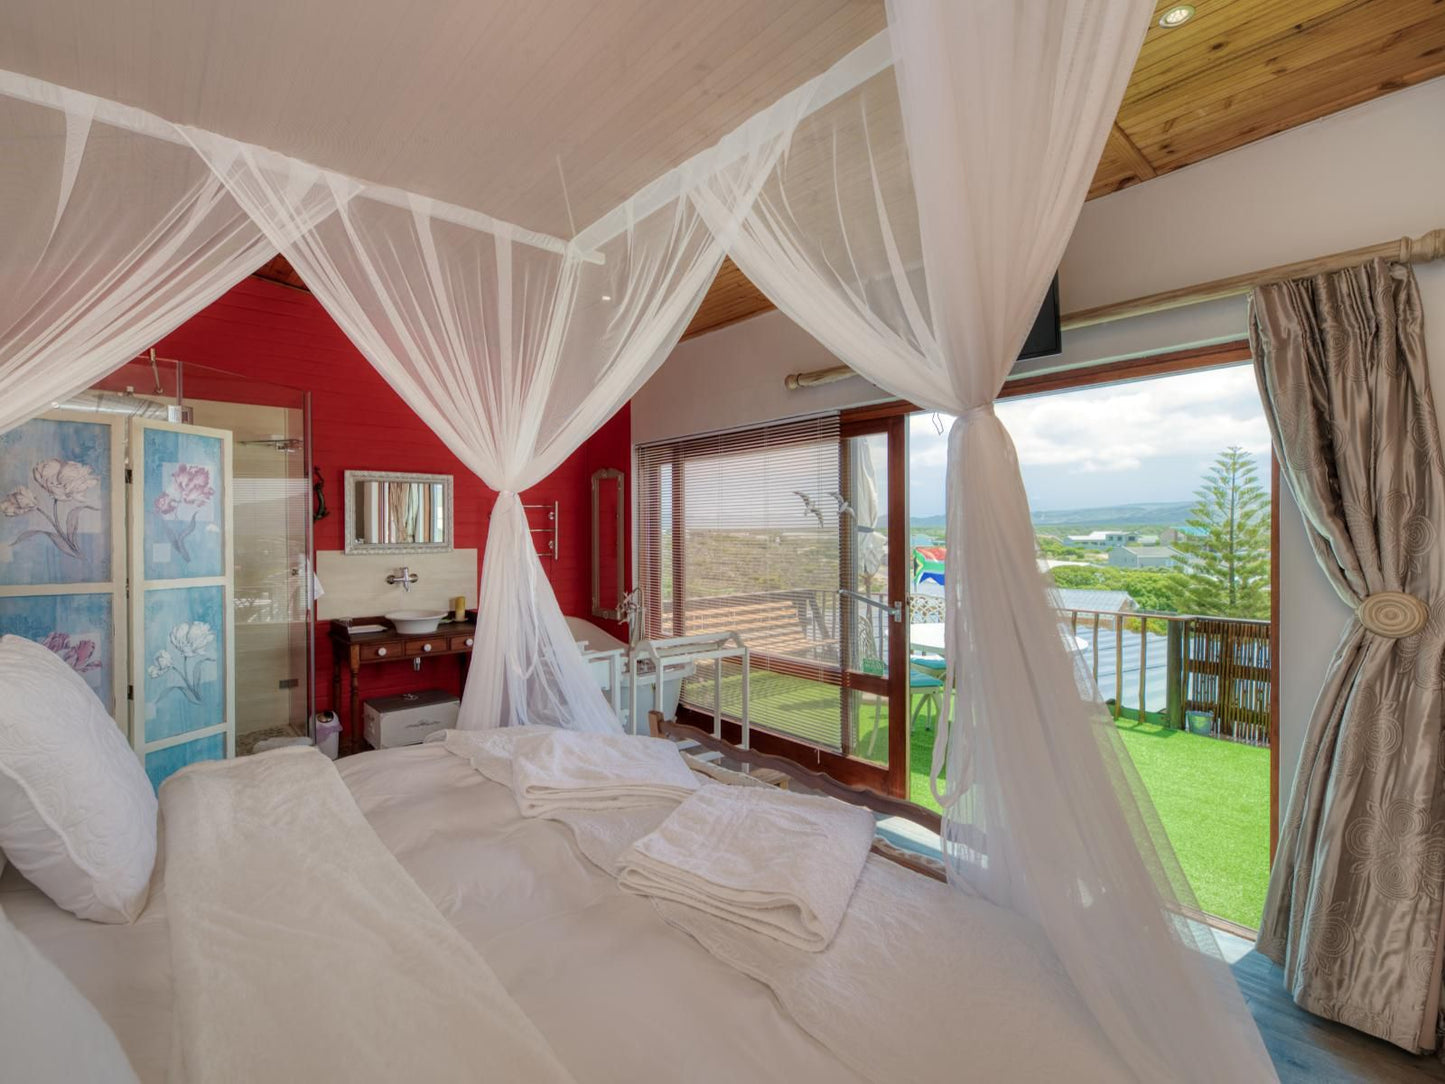 The Ark B And B Pearly Beach Western Cape South Africa Bedroom